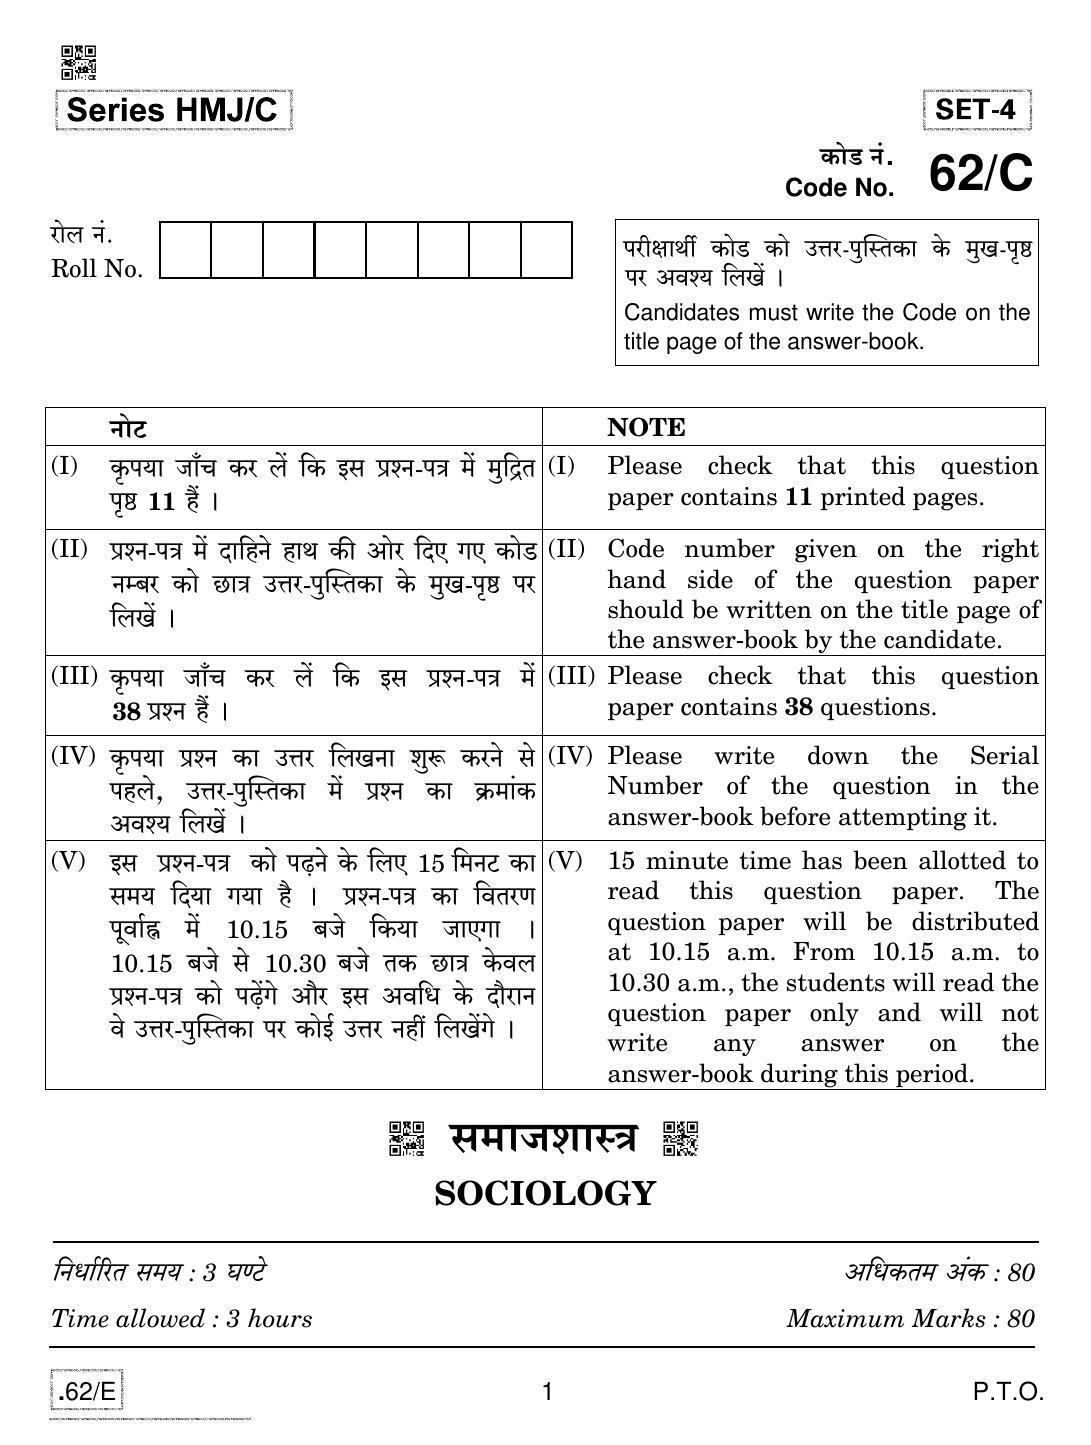 CBSE Class 12 Sociology 2020 Compartment Question Paper - Page 1